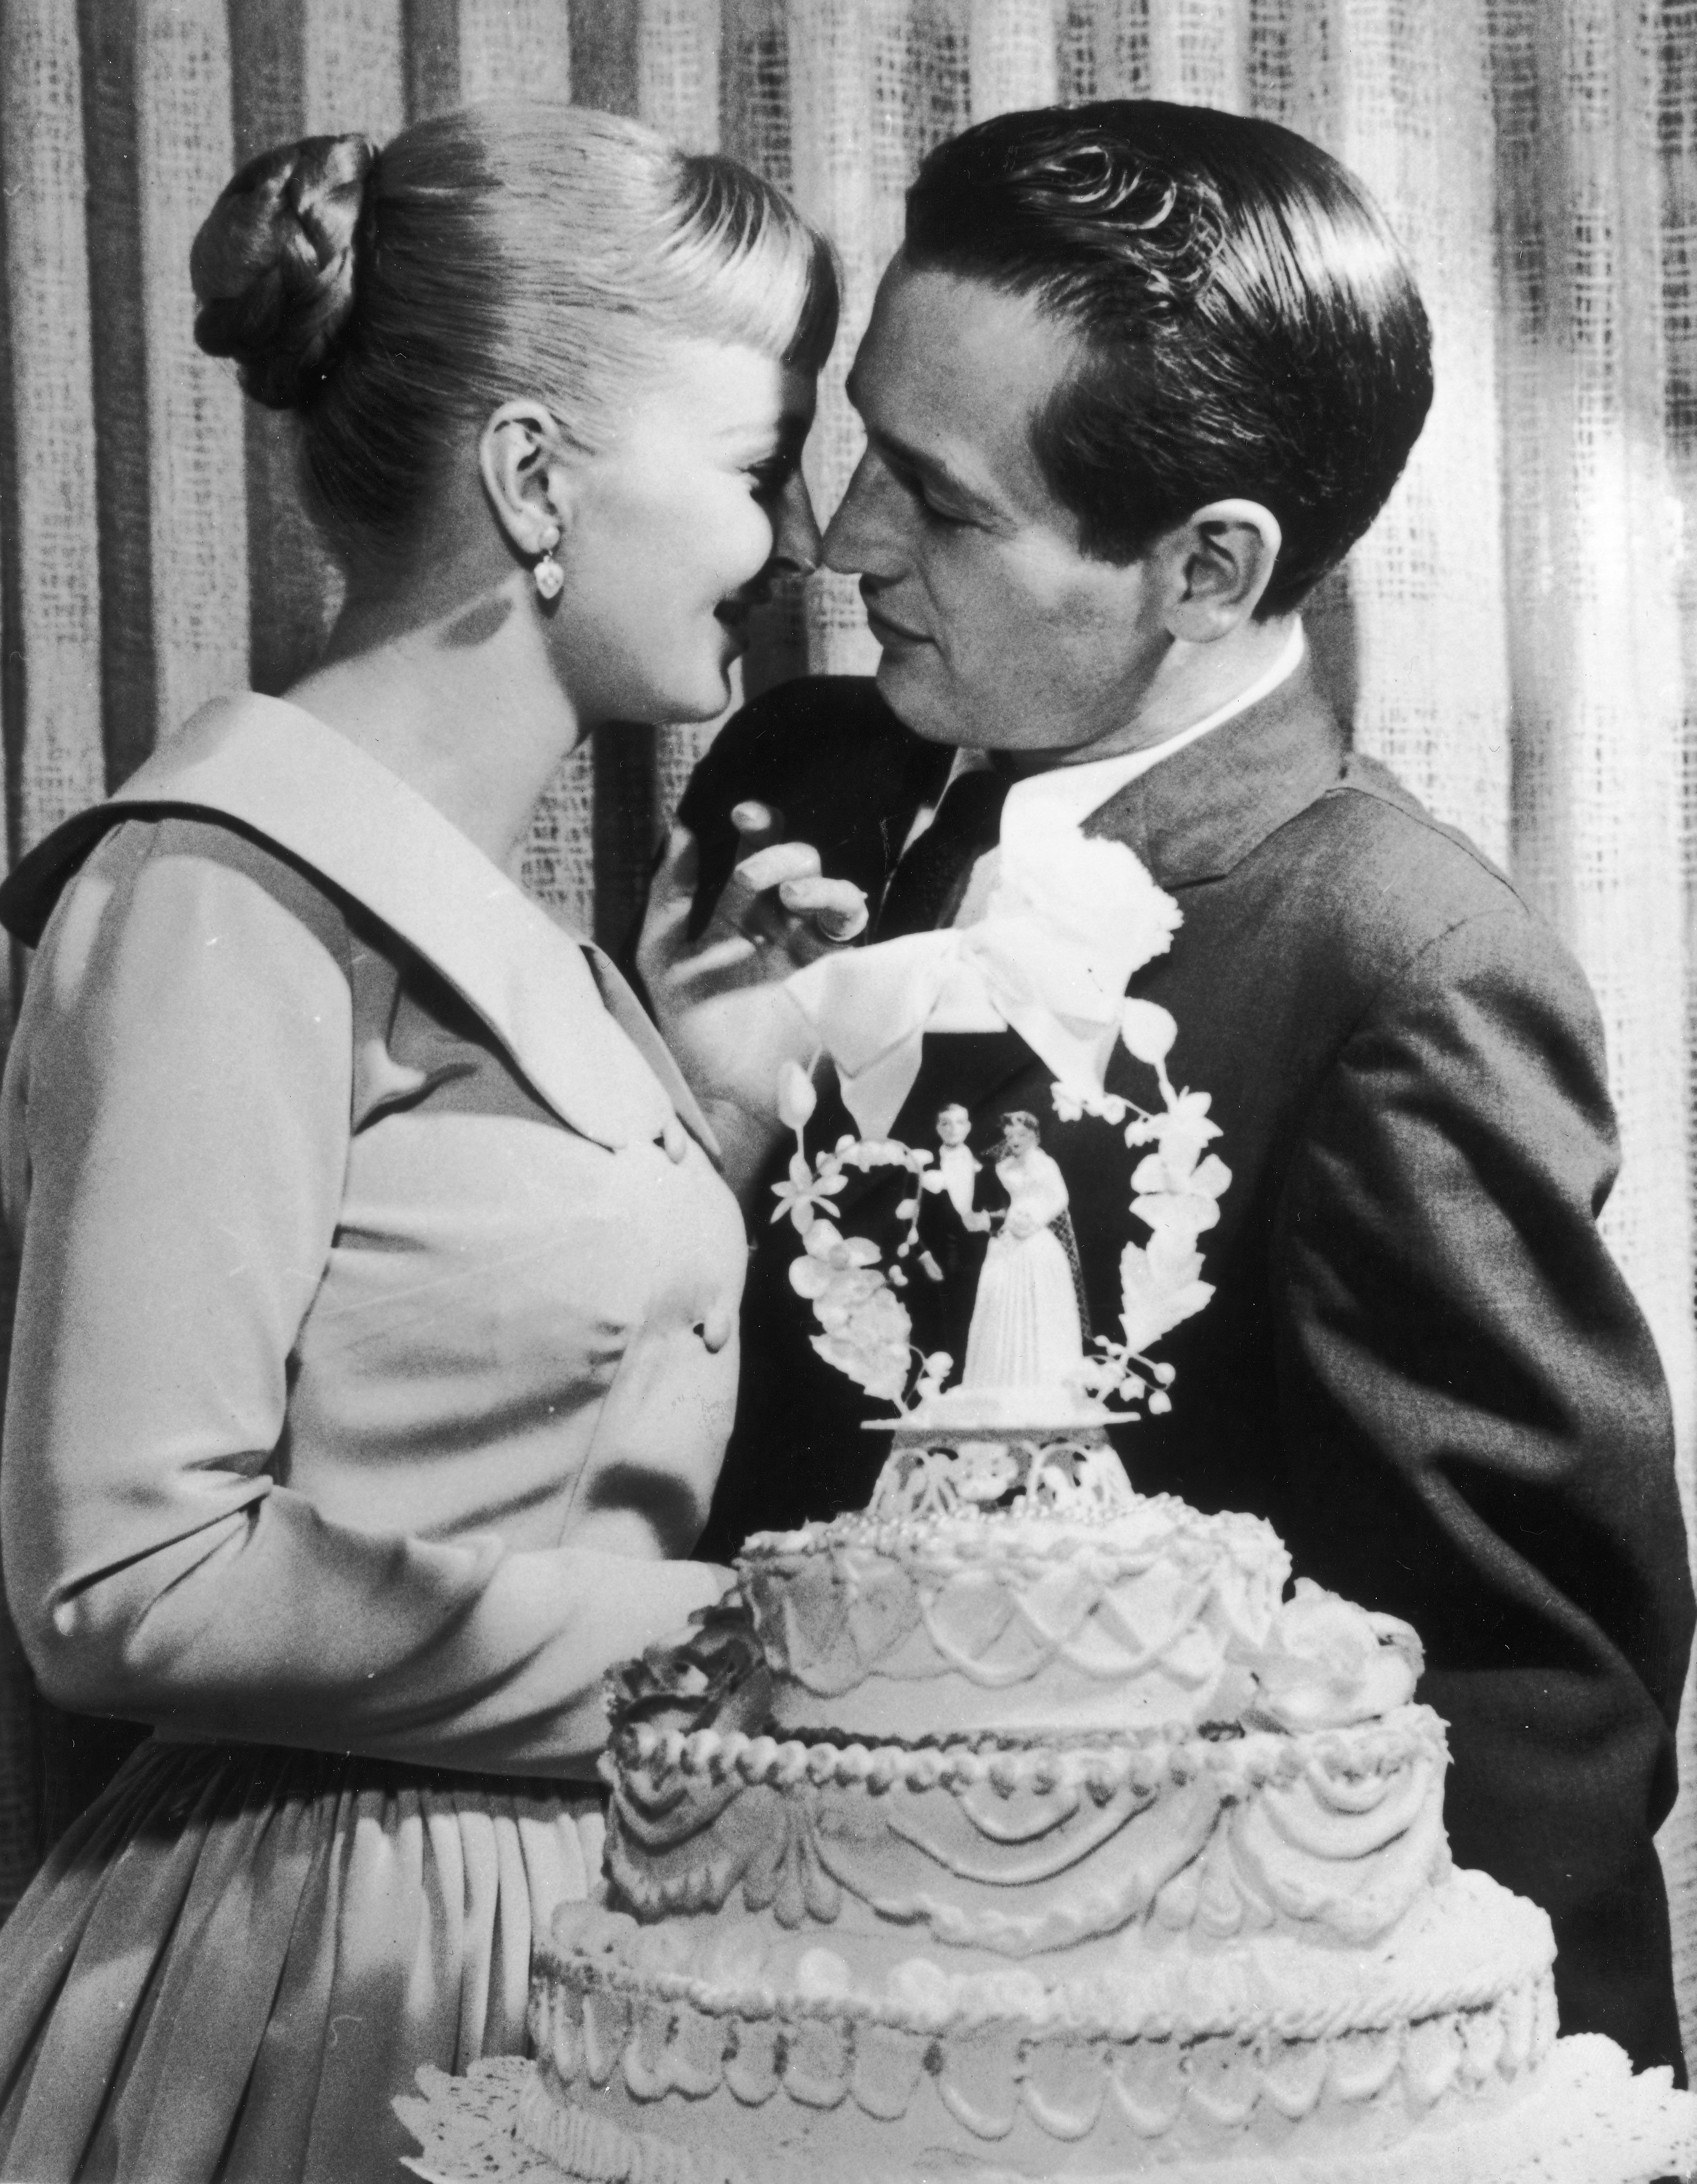 Paul Newman and Joanne Woodward during their wedding at the El Rancho hotel-casino, Las Vegas, Nevada, January 29, 1958. | Source: Getty Images